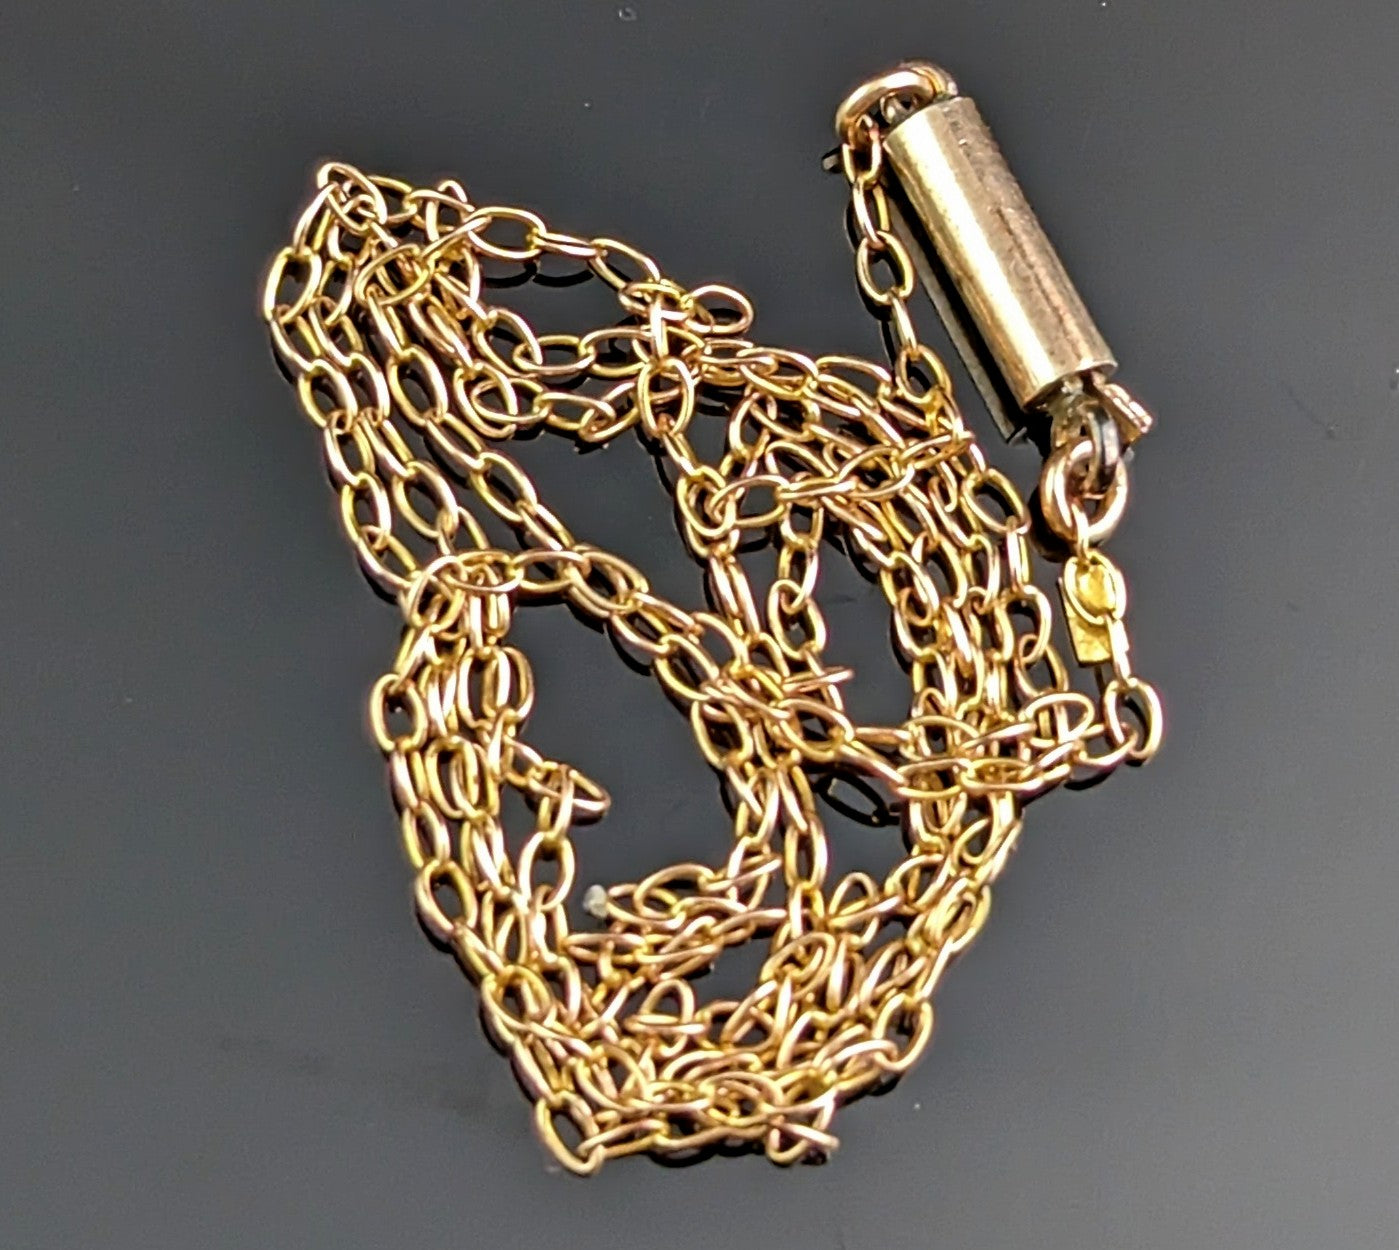 Antique 9k gold Trace link chain necklace, Dainty, Edwardian